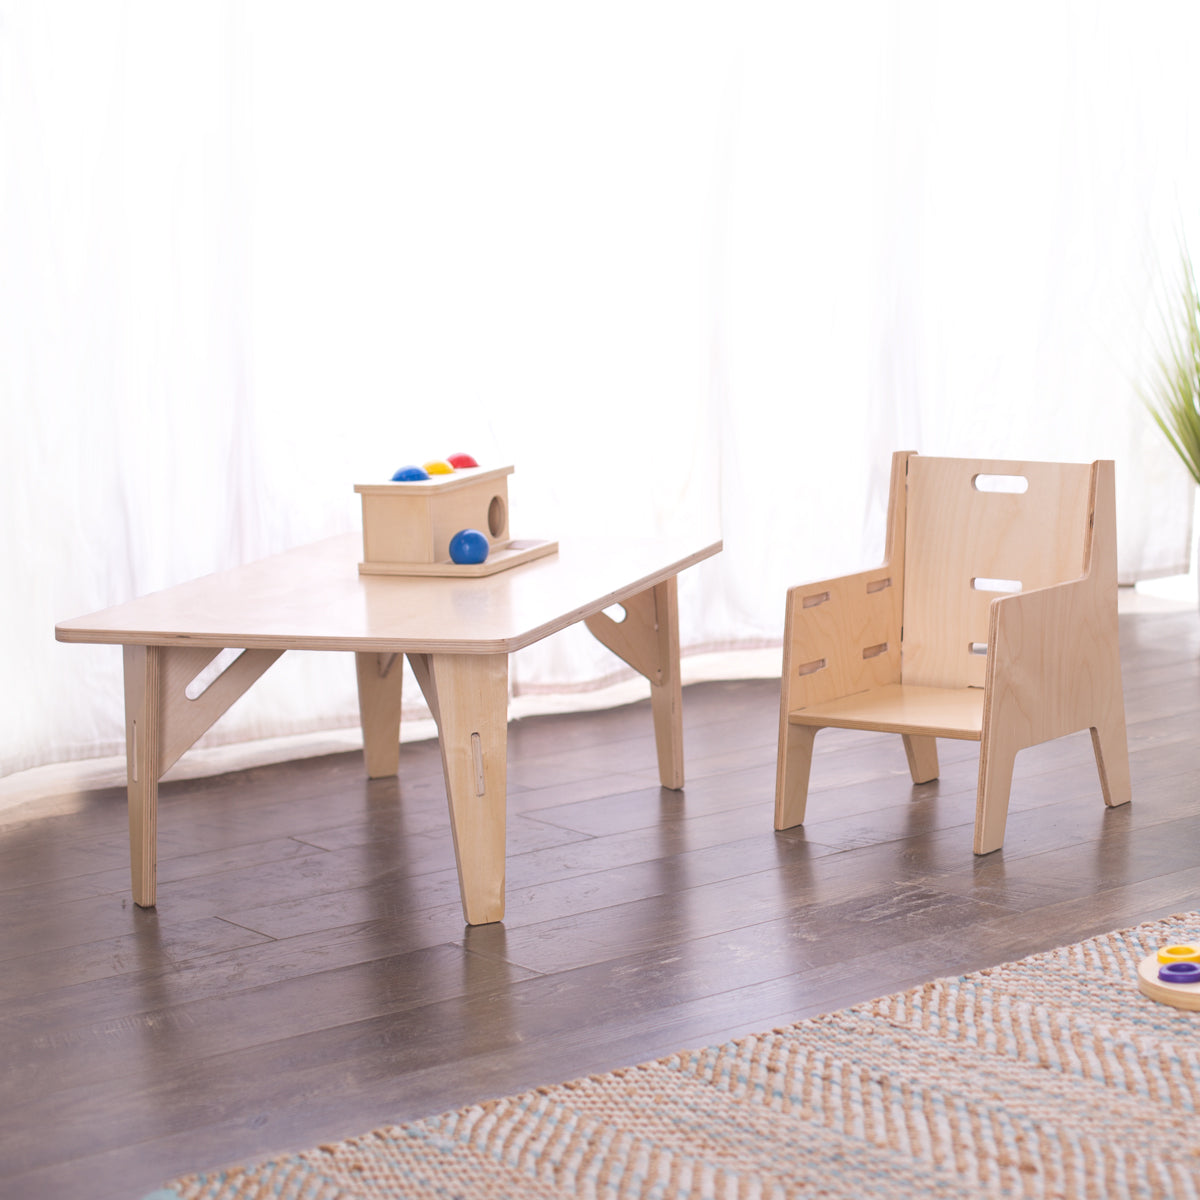 Best Montessori Weaning Table For Toddlers - Sprout Kids Table Review